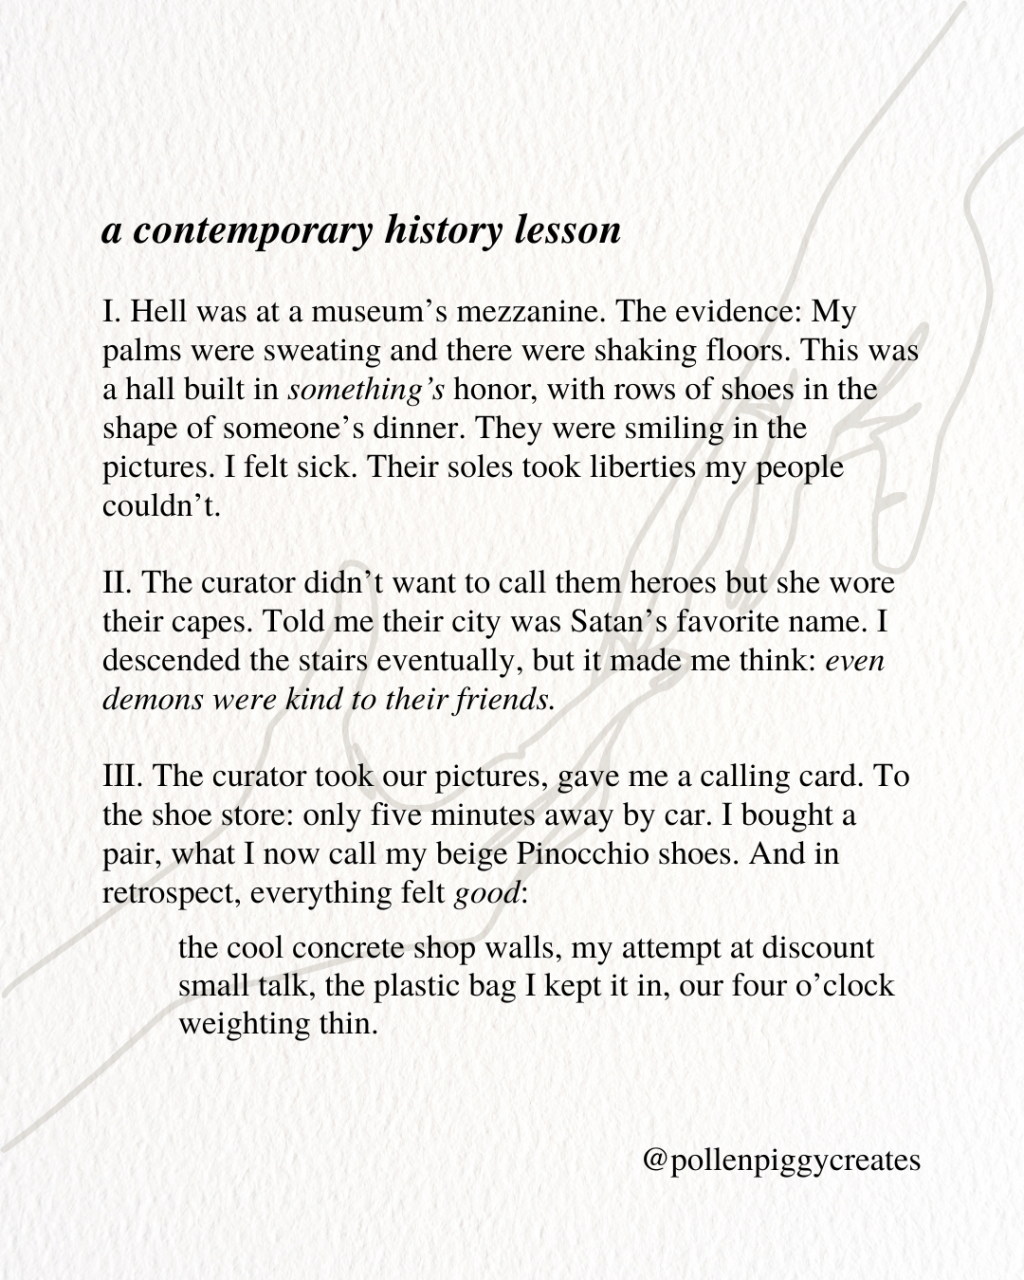 a contemporary history lesson [POEM]